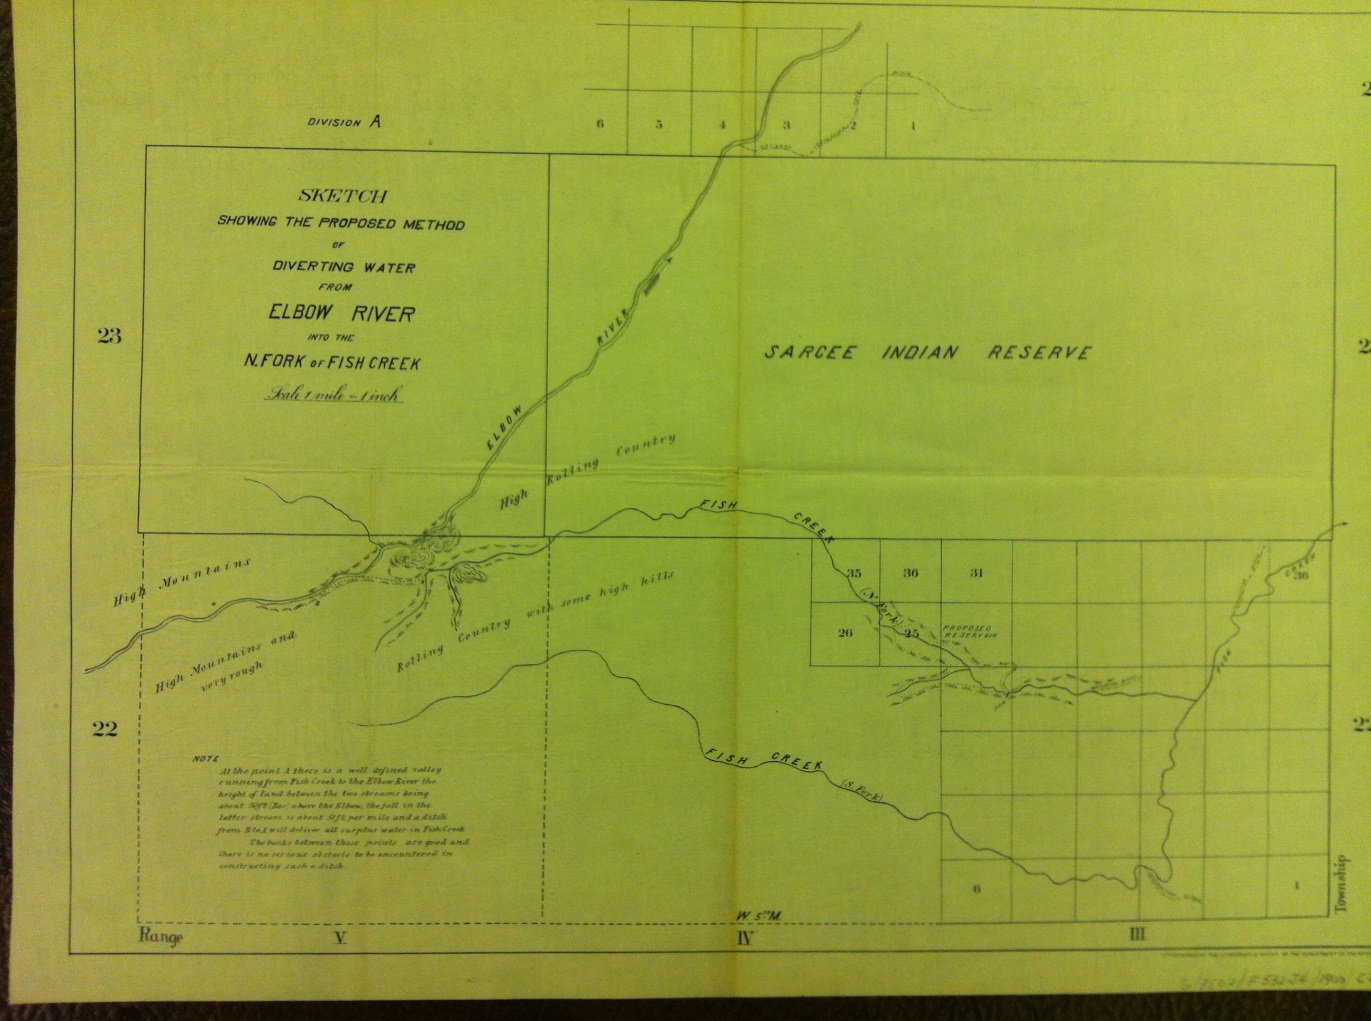 Proposed Method of Diverting Water from the Elbow River to North Fish Creek (Department of Interior, 1900)